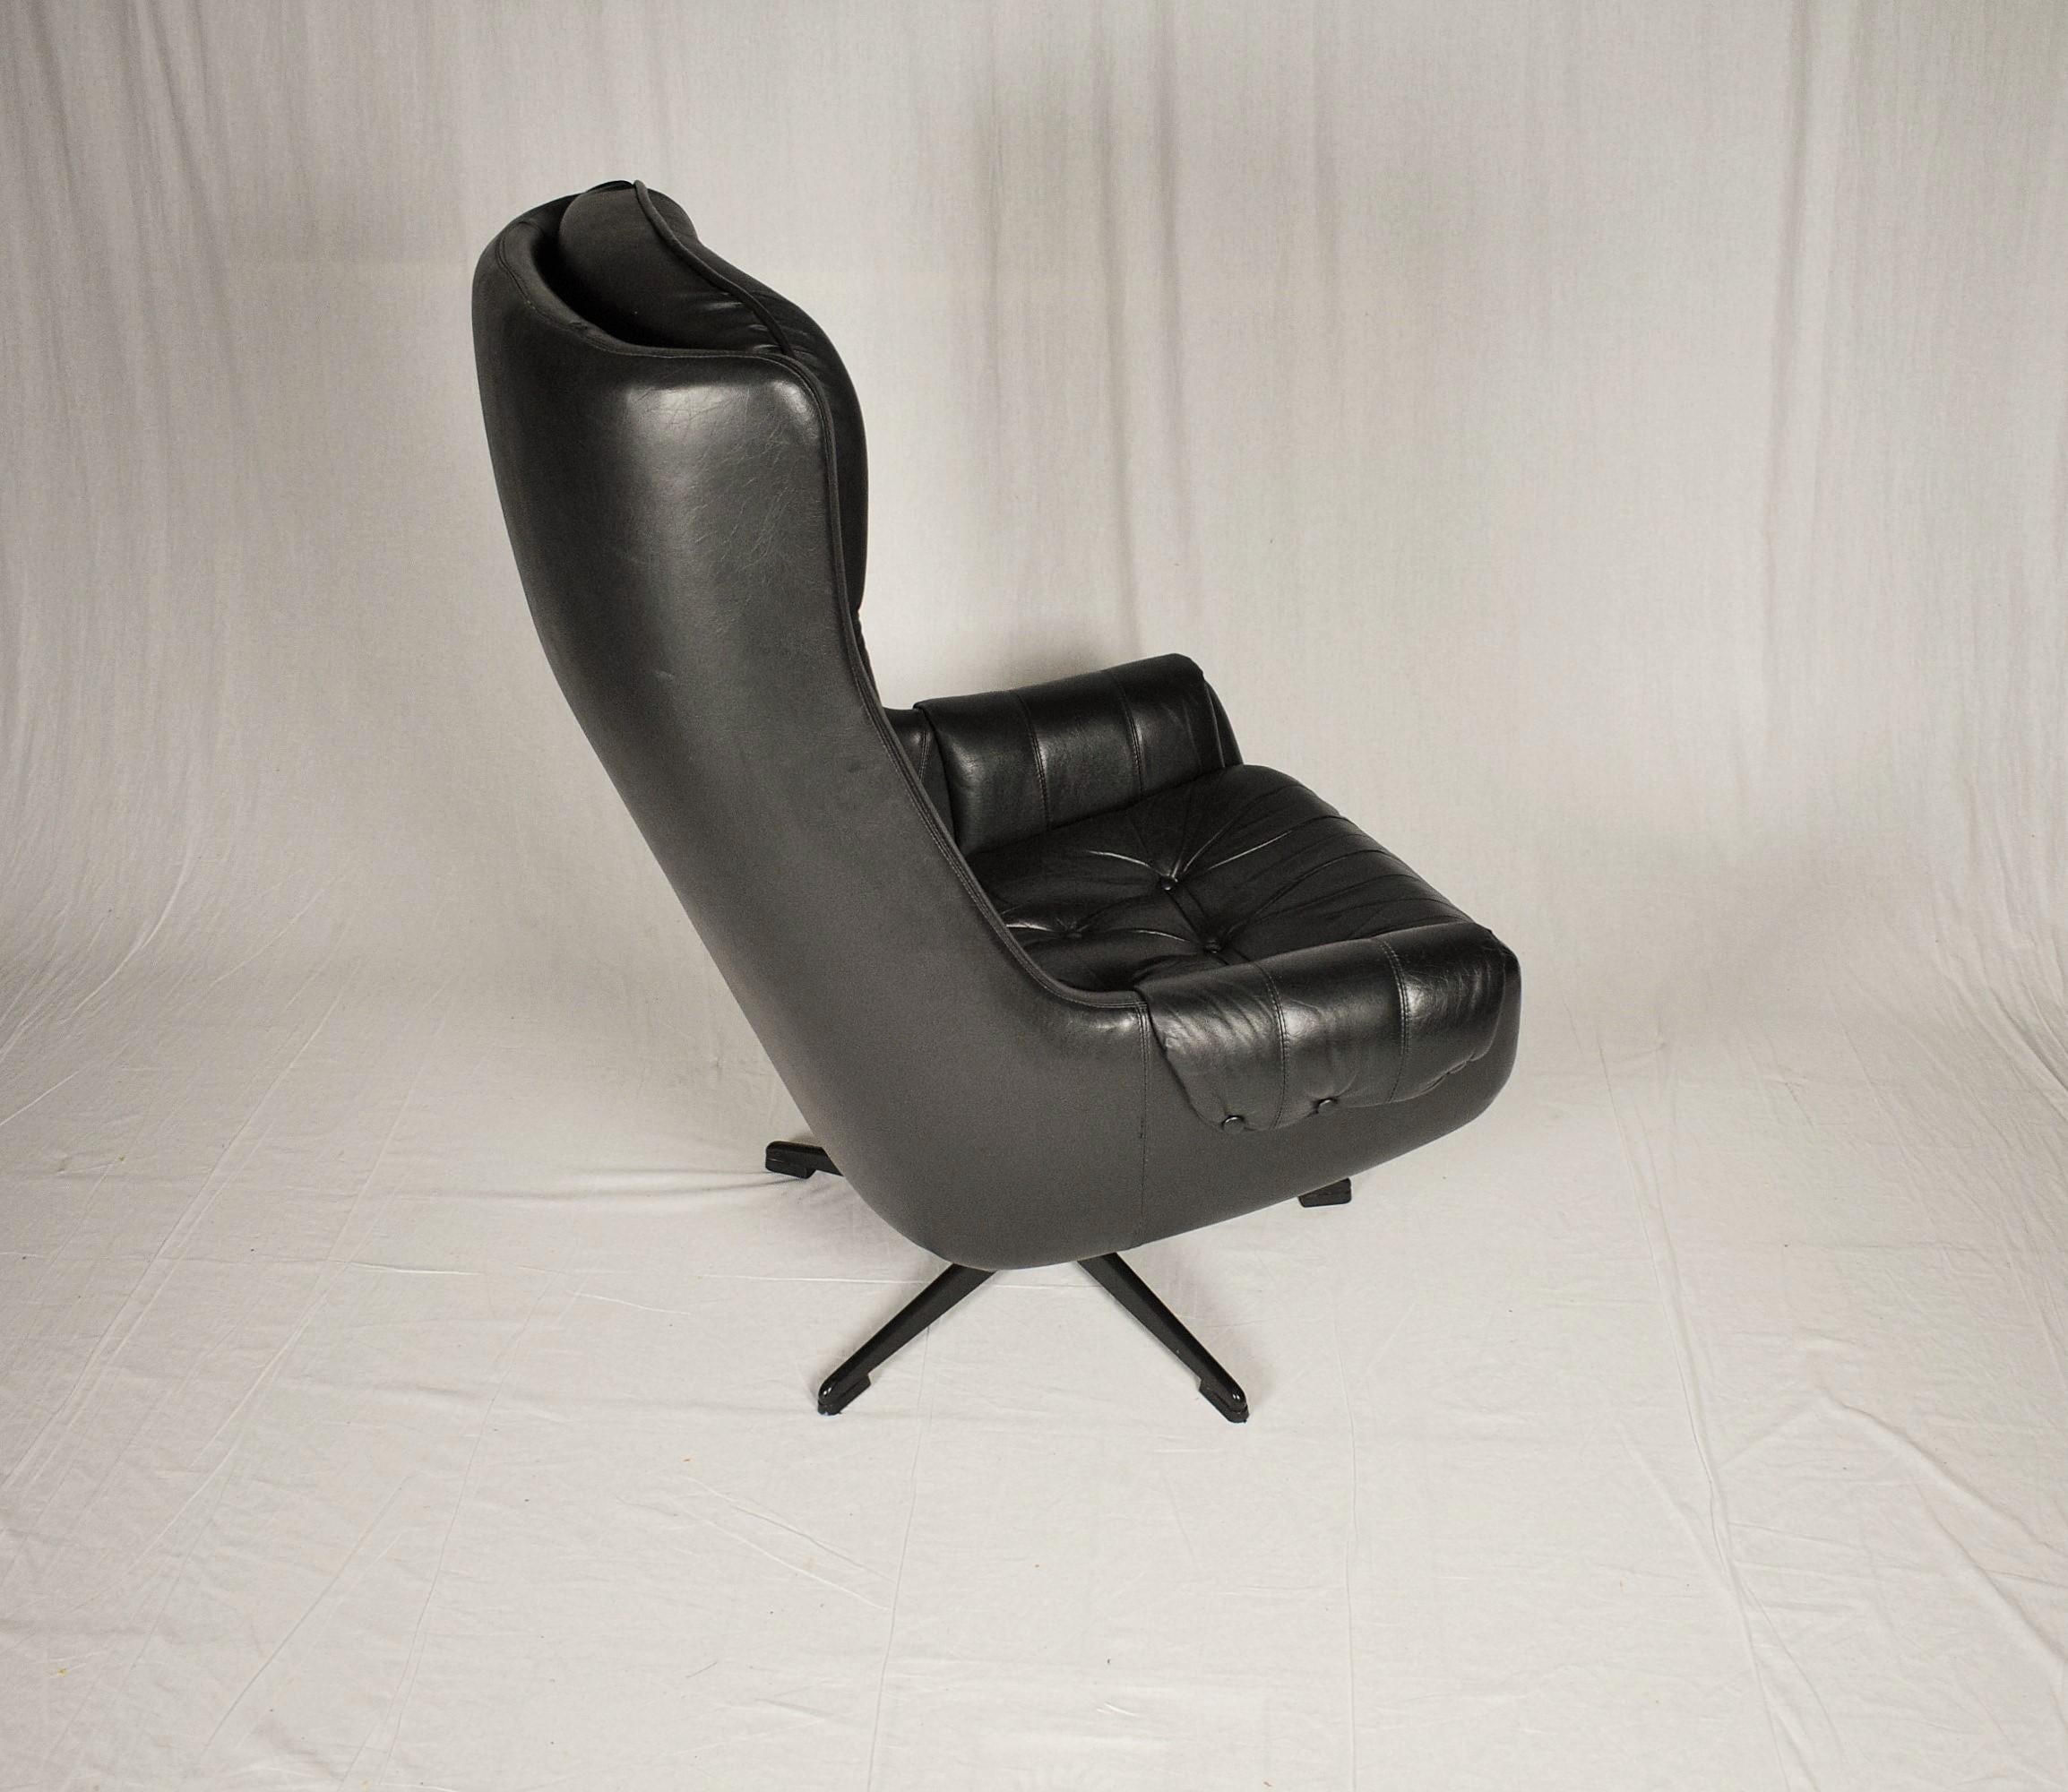 Late 20th Century Design Scandinavian Leather Armchair / Lounge Chair by Peem, 1970s For Sale